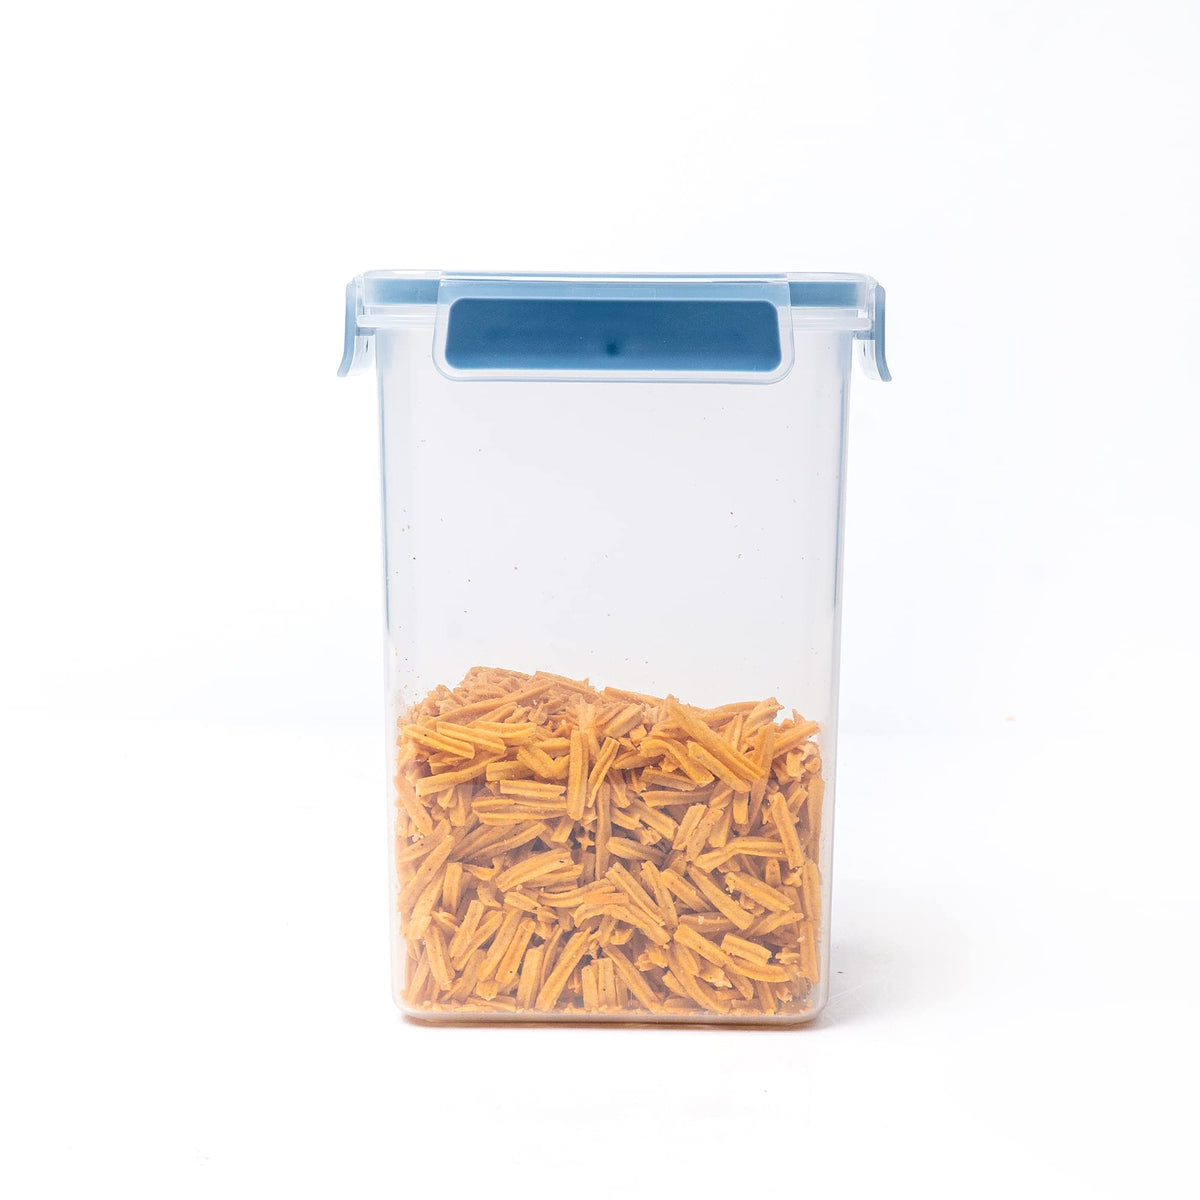 Anko 1.5 L BPA-free Leak-proof Airtight Plastic Storage Container/Jar With Lockable Lids | Storage Container/Pasta Container With Spill-proof Lid | Containers Ideal for Pasta, Nuts, Cookies & Cereals